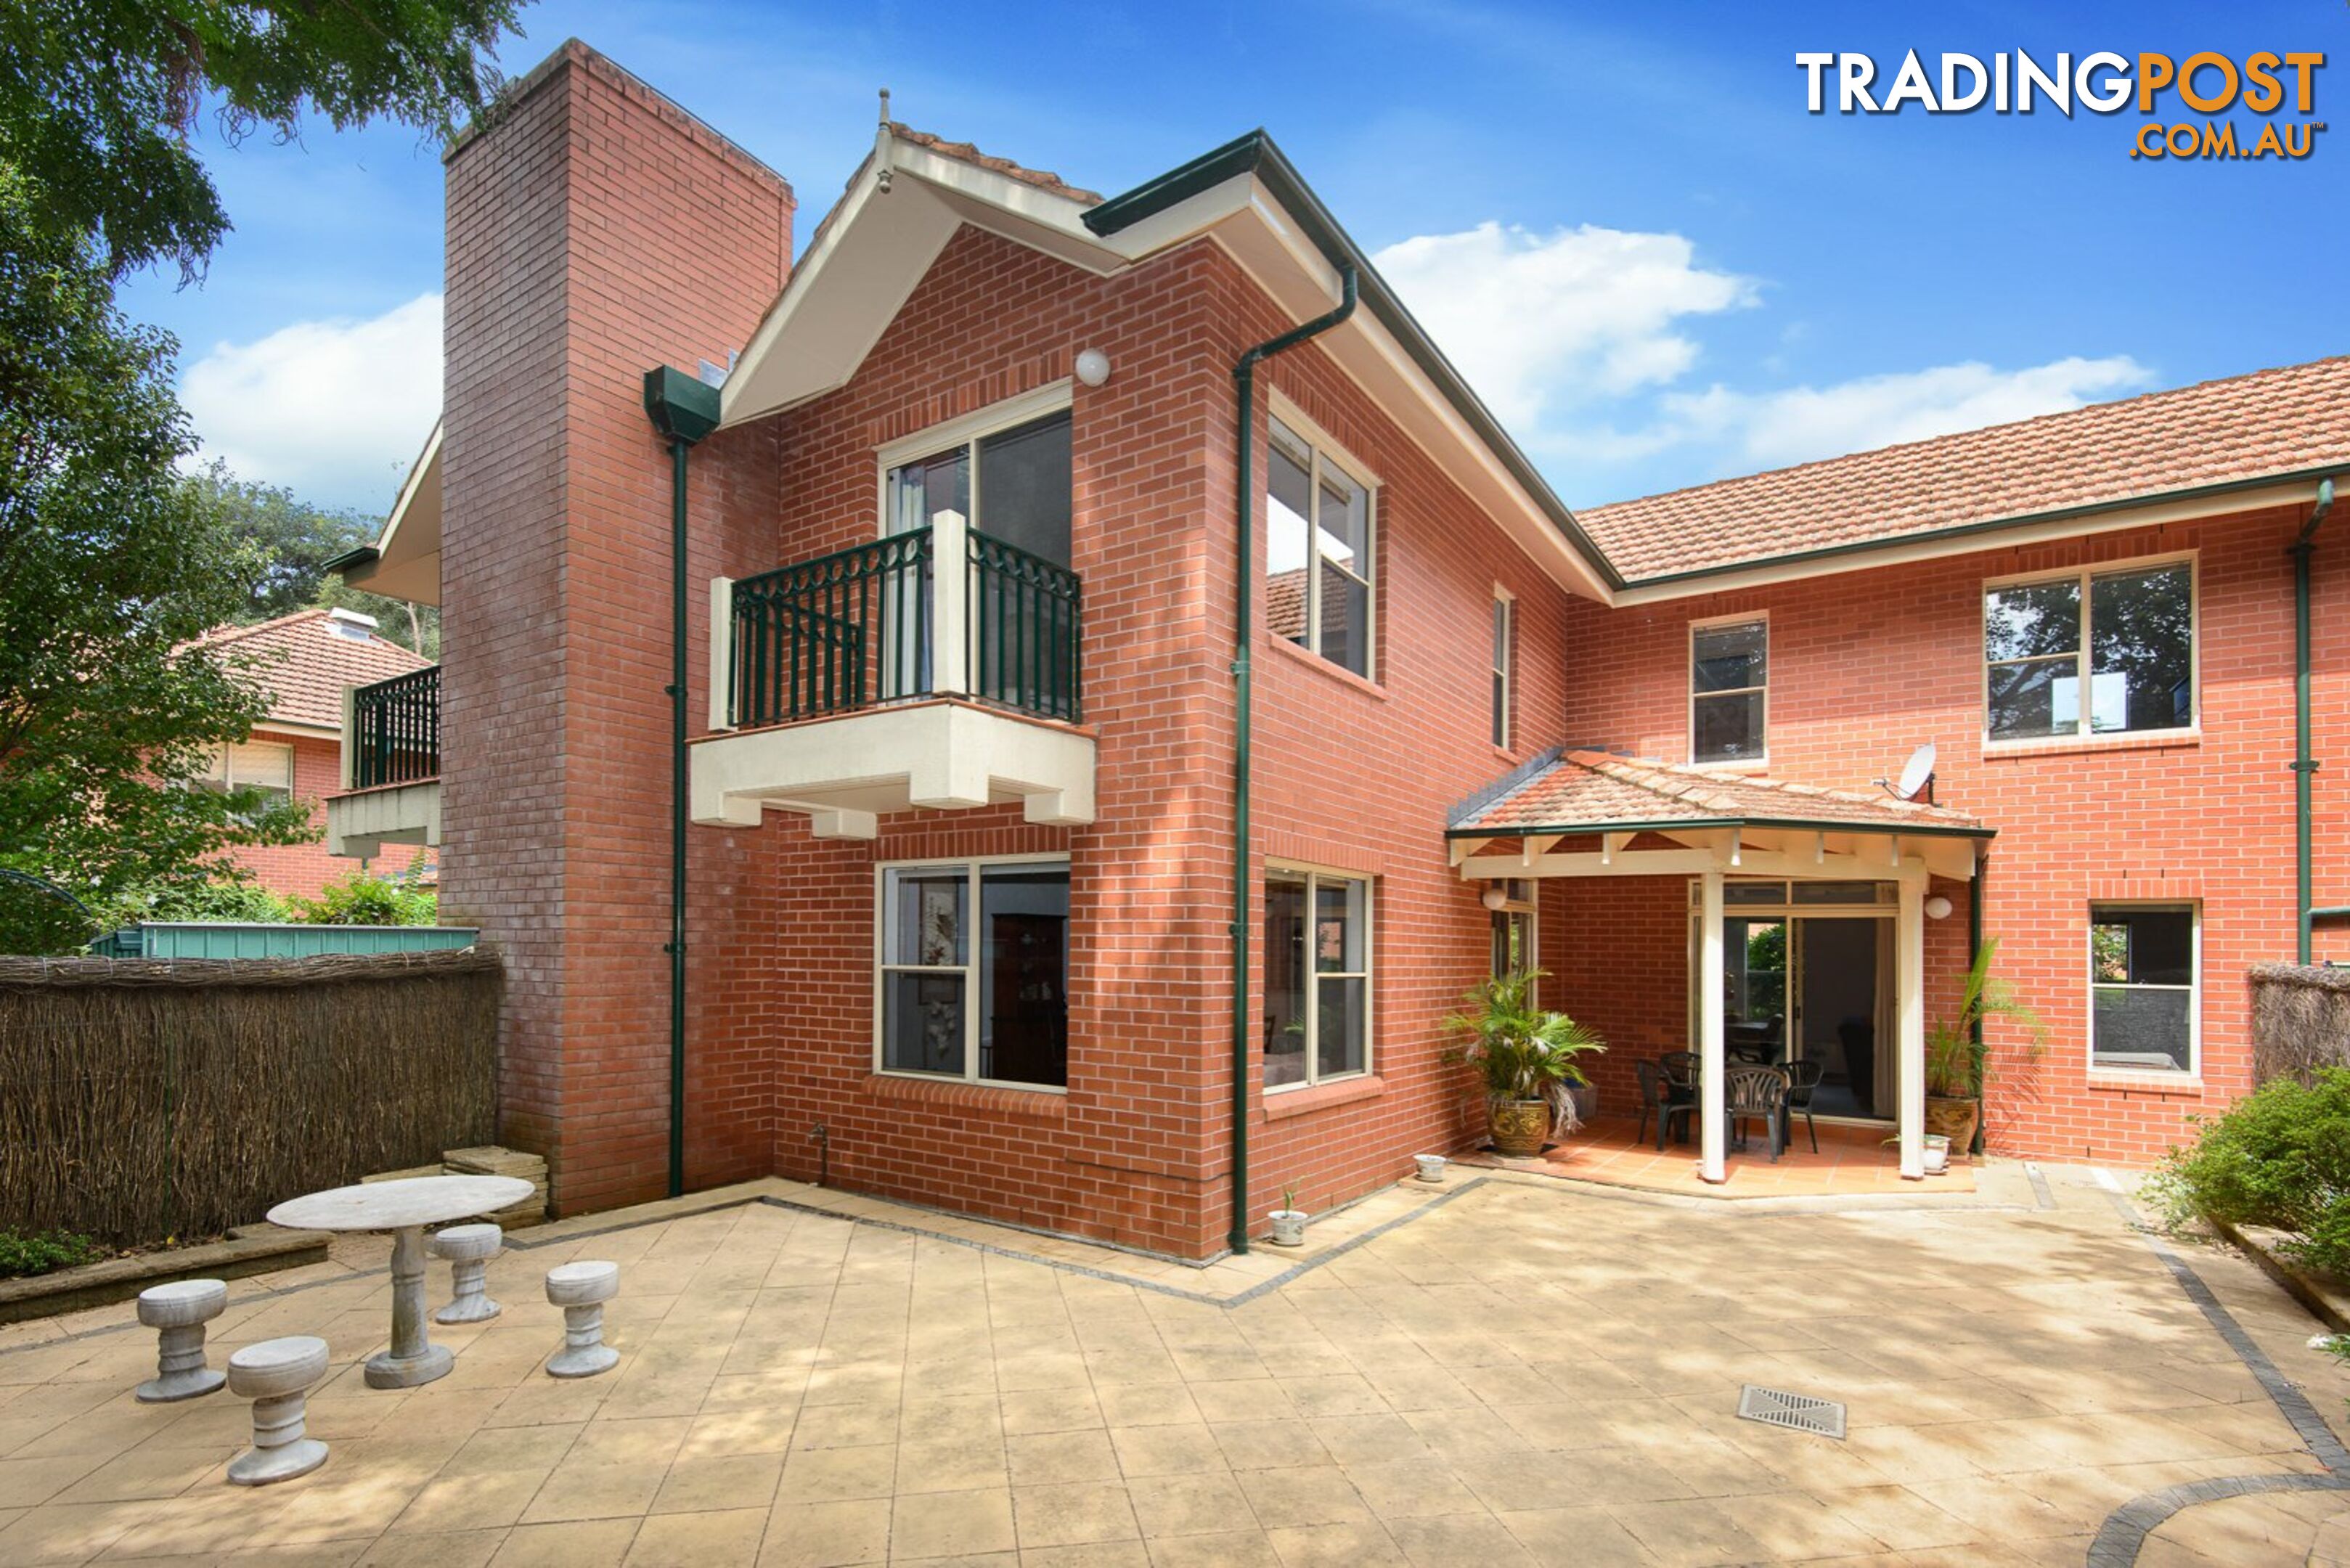 Townhouse 3/18-22 Stanley Street ST IVES NSW 2075